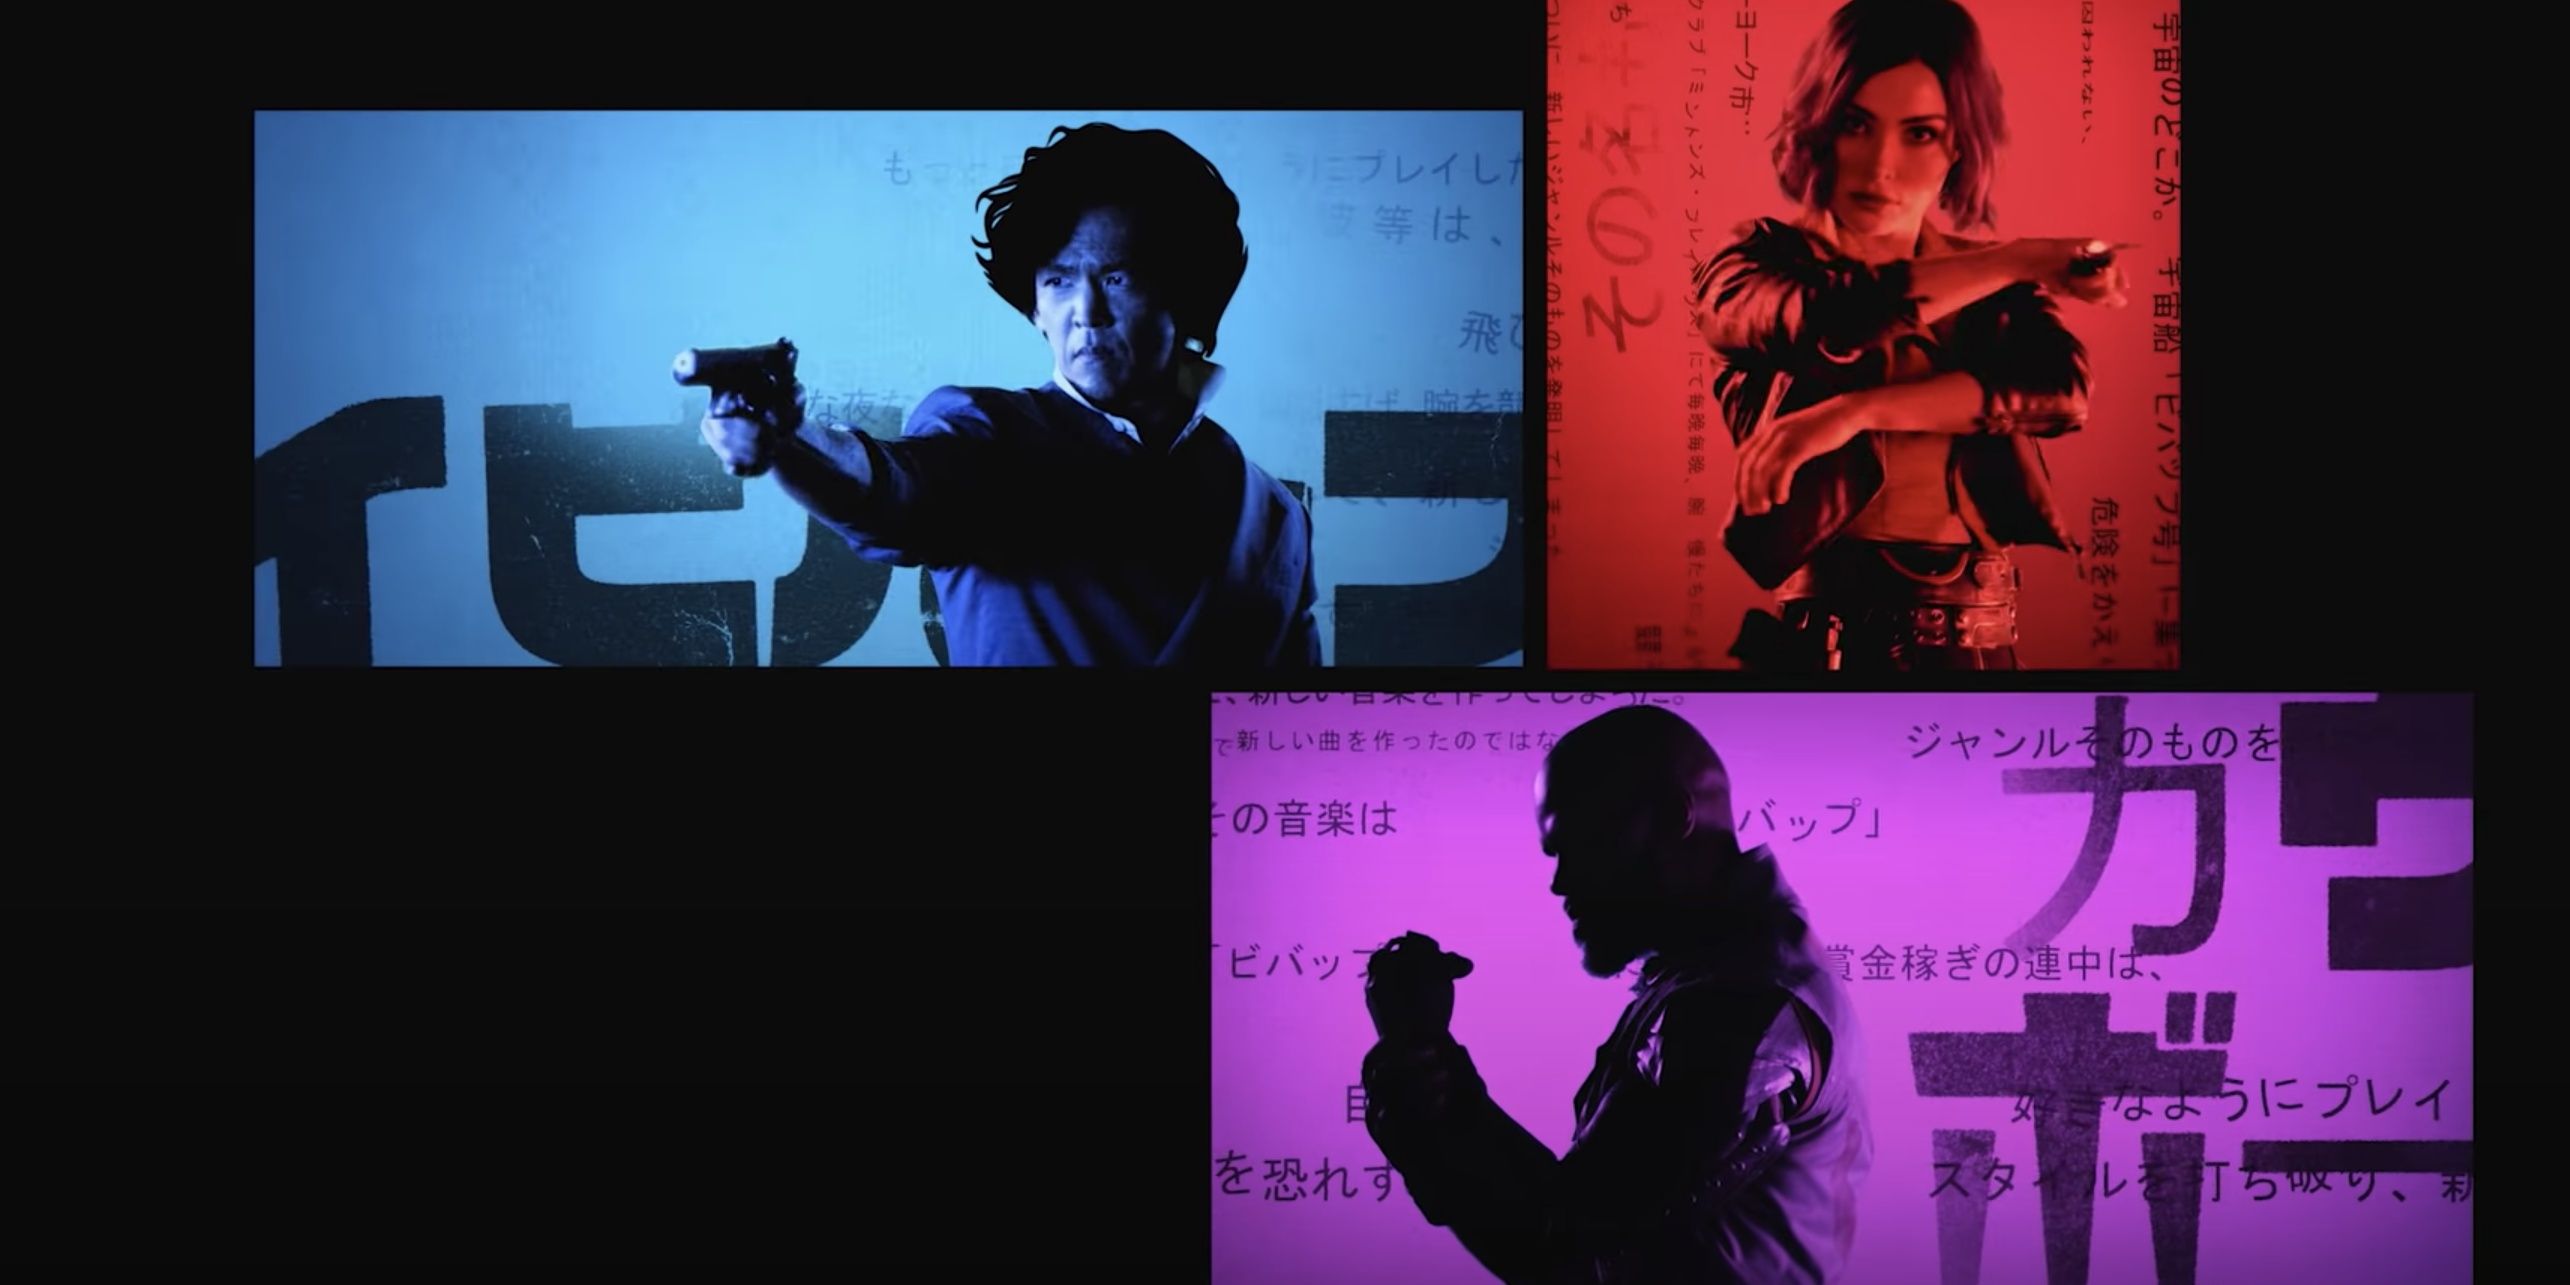 The characters pose in the opening credits for the live action Cowboy Bebop